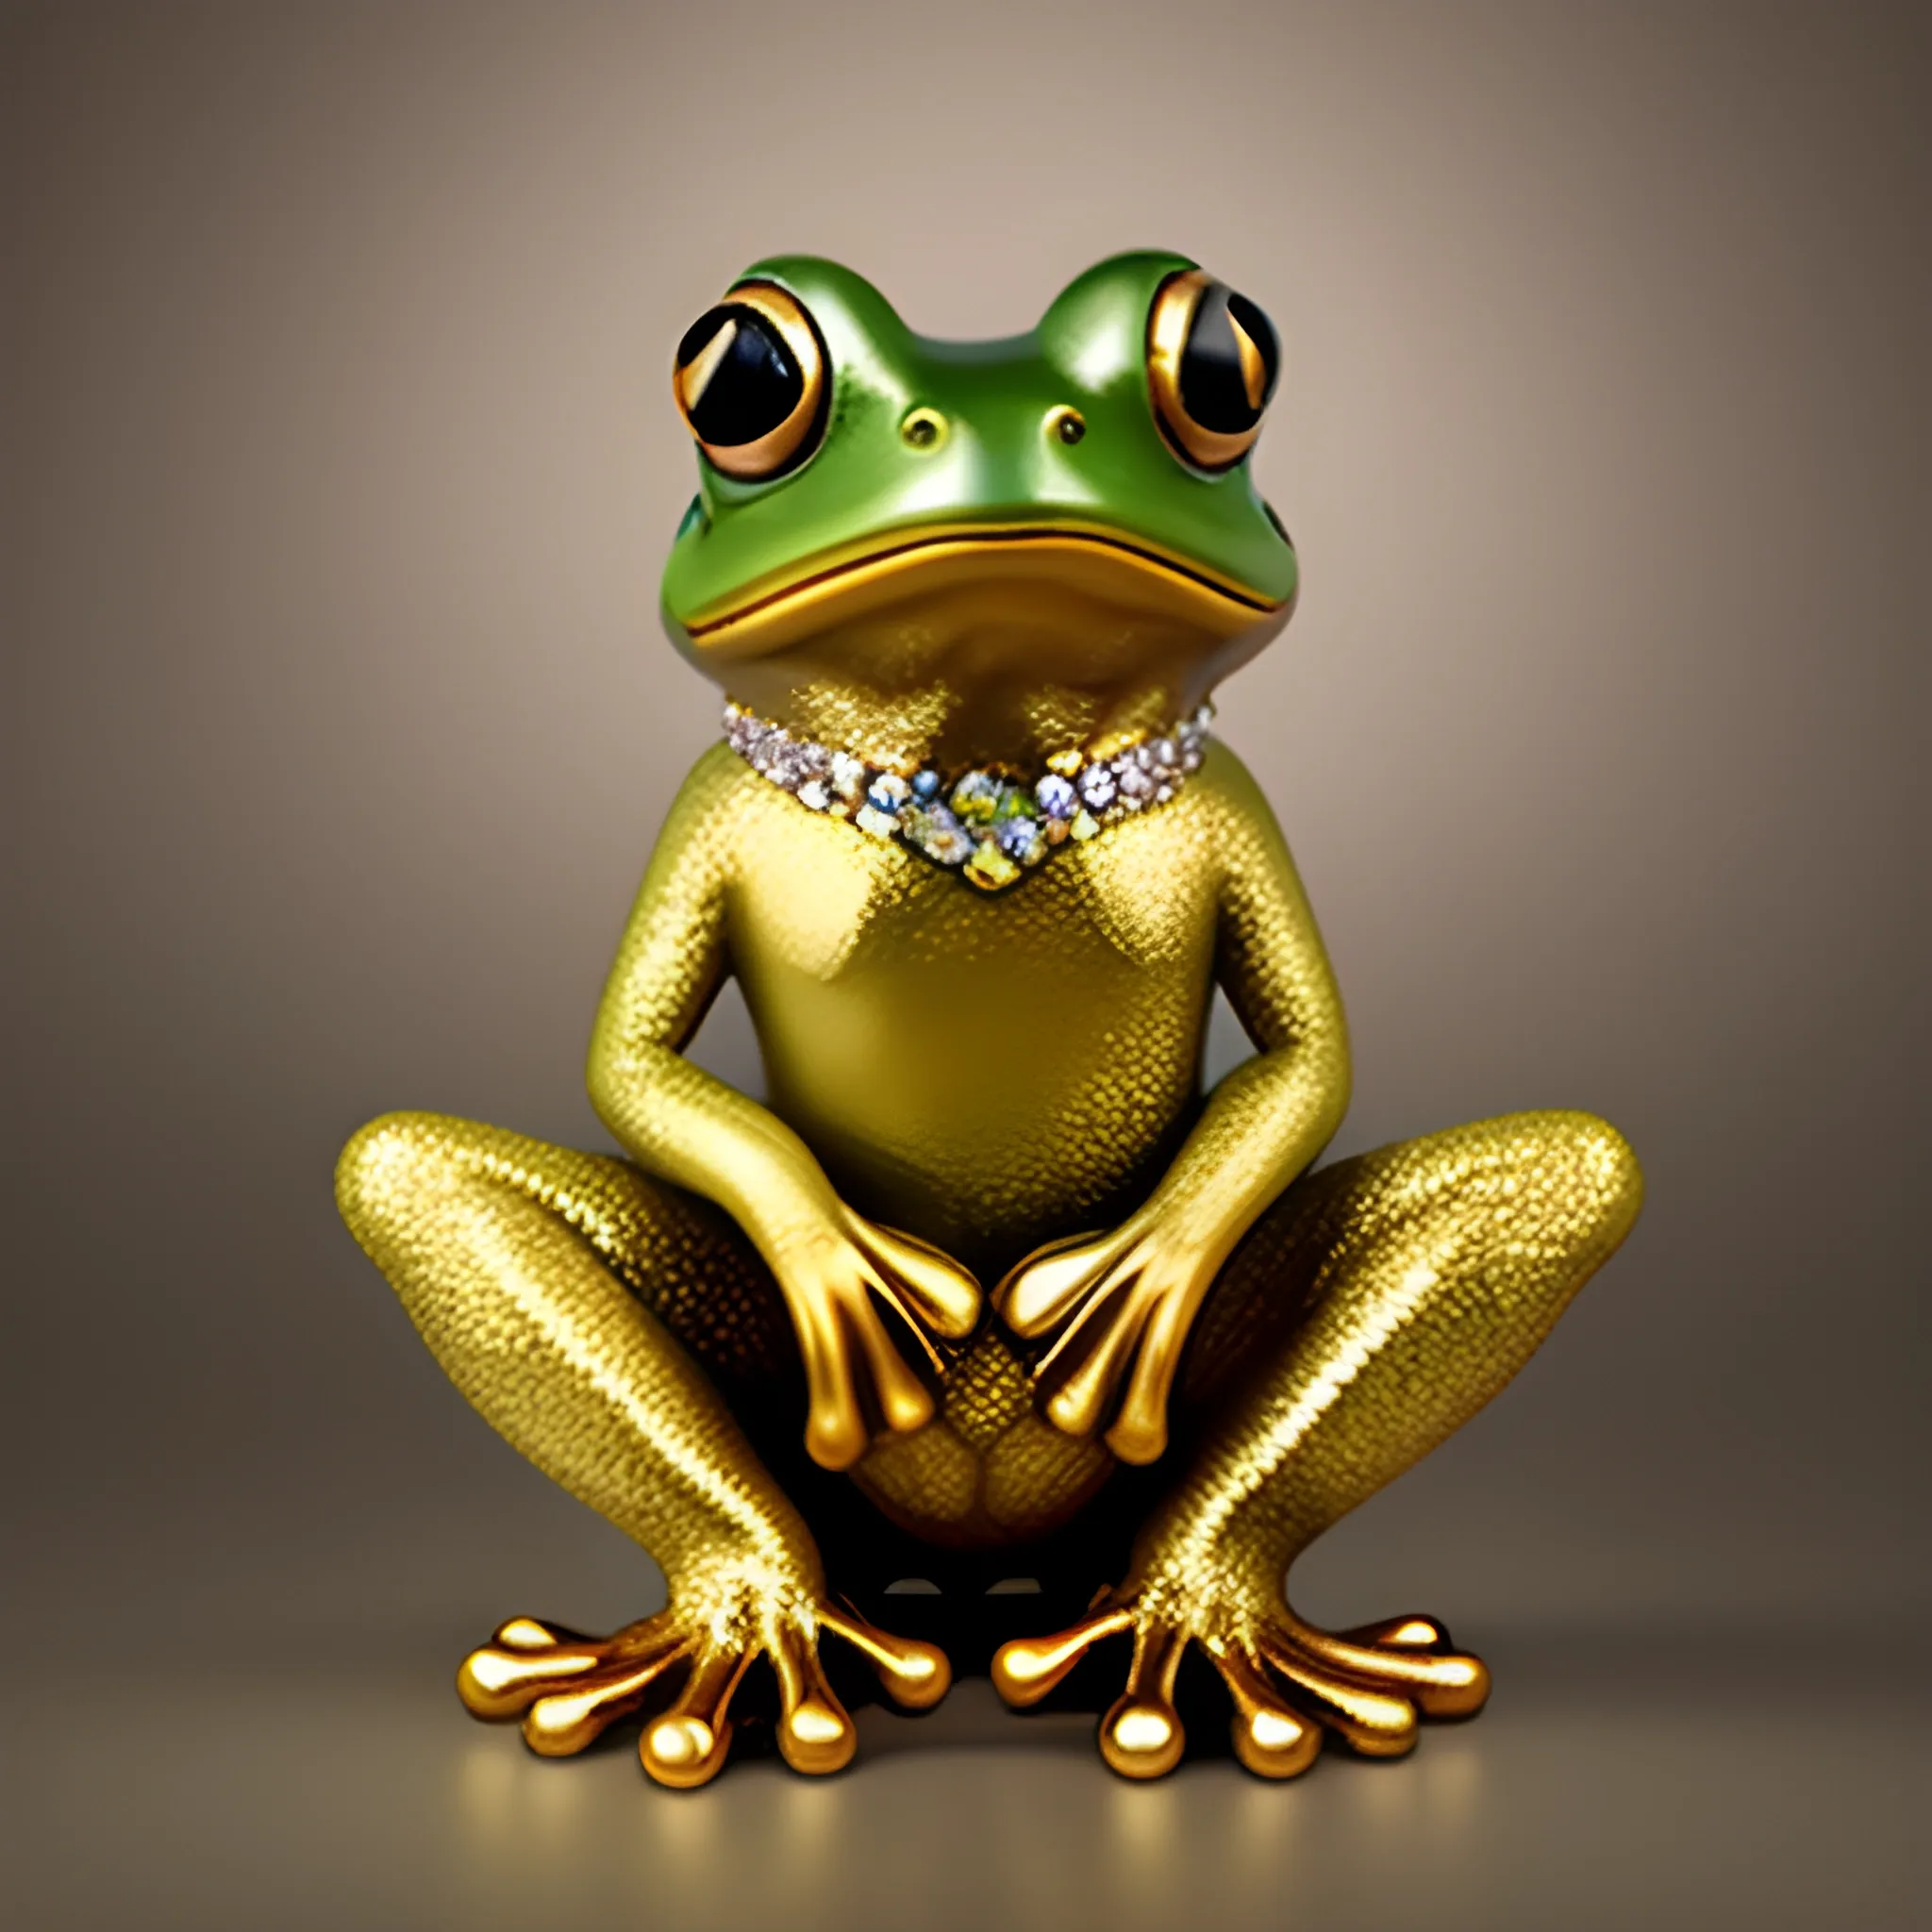 frog statue with crystal eyes, highly detailed, golden

